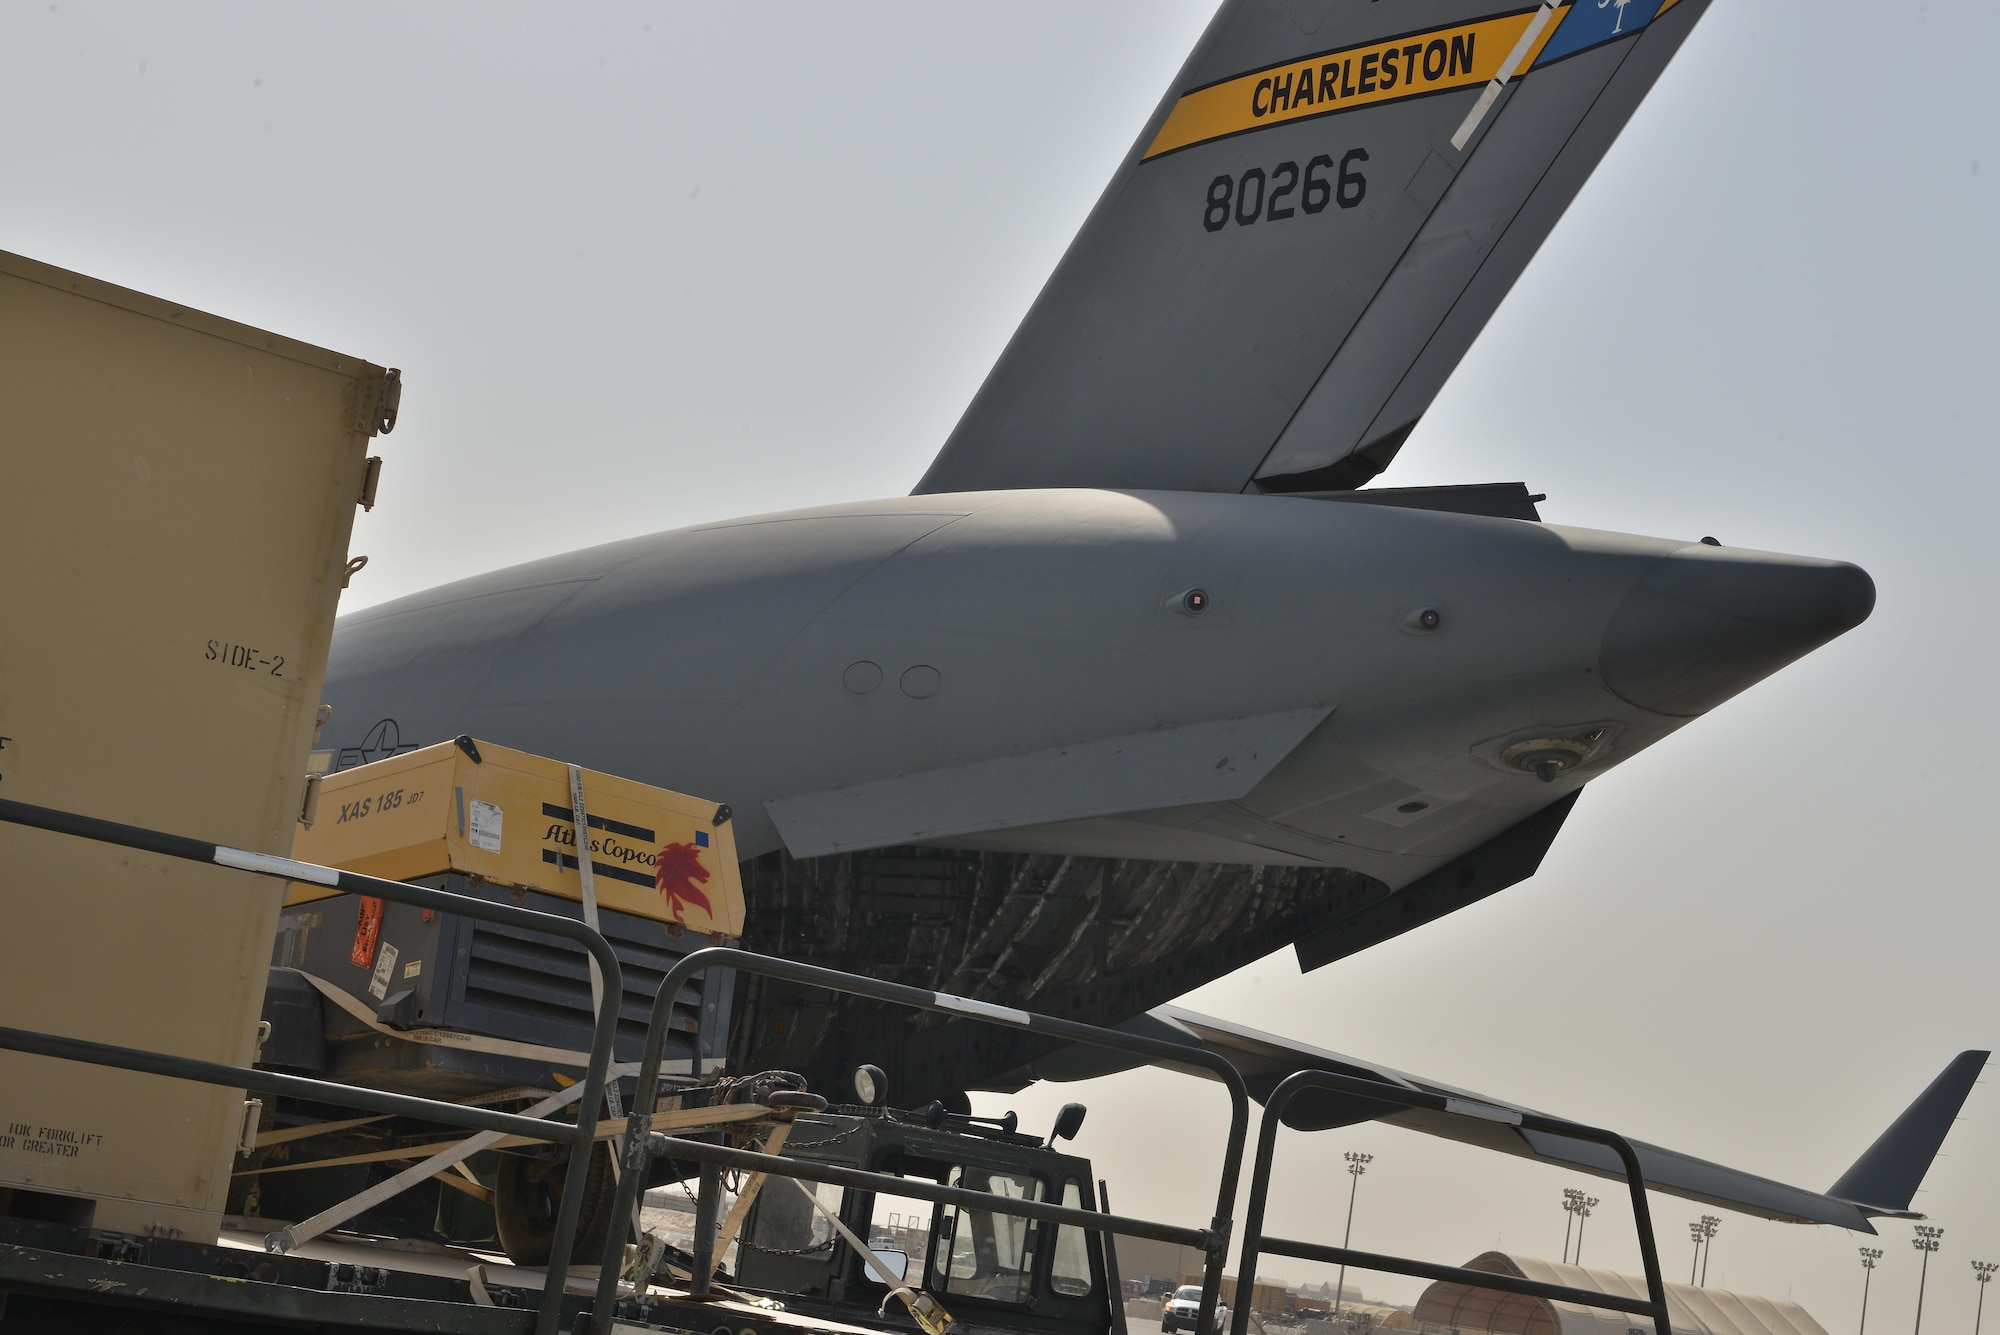 A C-17 Globemaster aircraft assigned to the 437th Air Lift Wing, Joint base Charleston, South Carolina, is prepared to be loaded with equipment to support RED HORSE Civil Engineering operations to repair a runway in Southwest Asia May 13, 2015 at Al Udeid Air Base, Qatar. (U.S. Air Force photo/Staff Sgt. Alexandre Montes) 